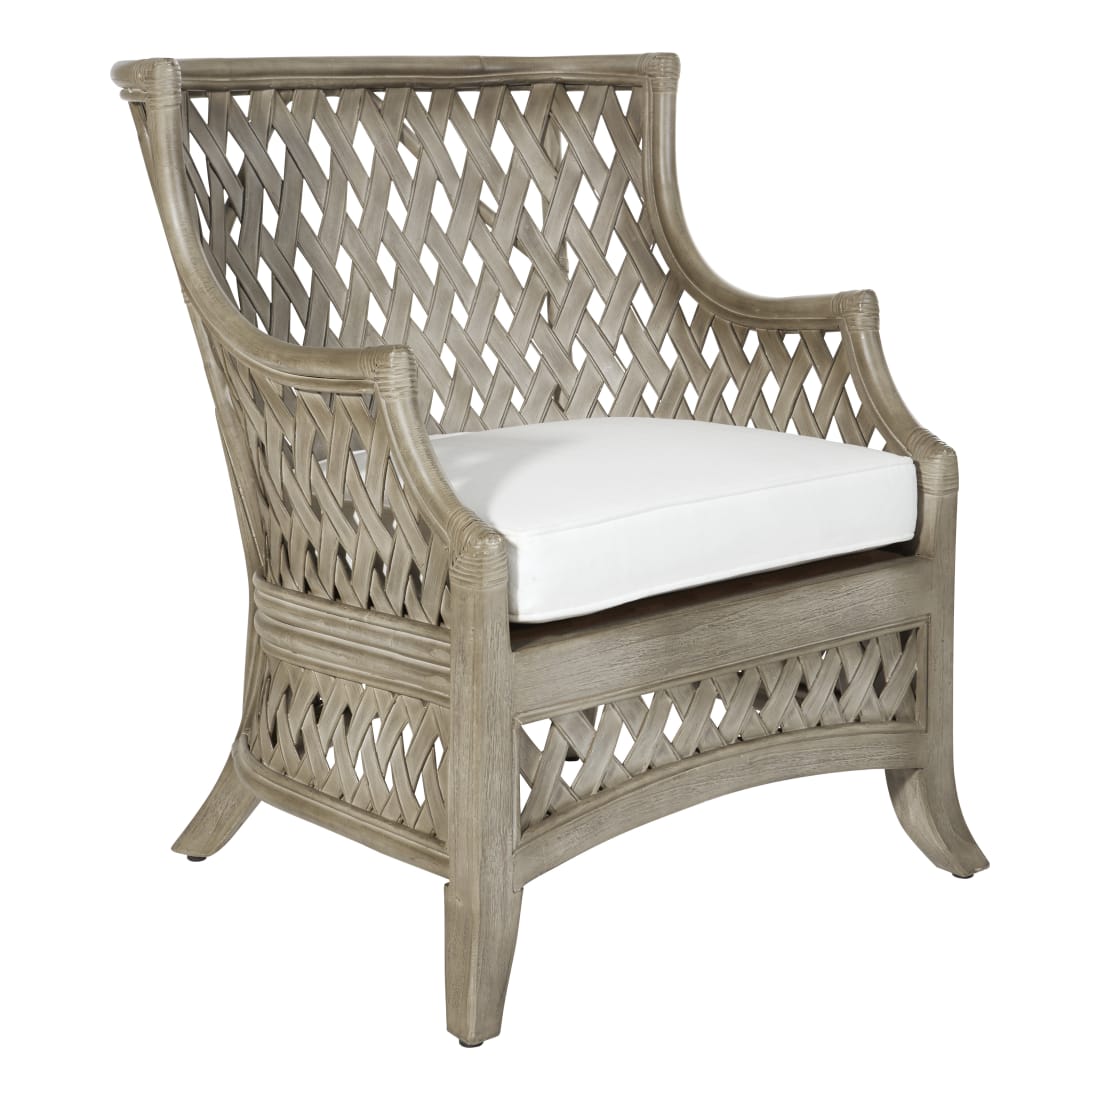 Kona Chair with Cream Cushion and Gray Washed Rattan Frame